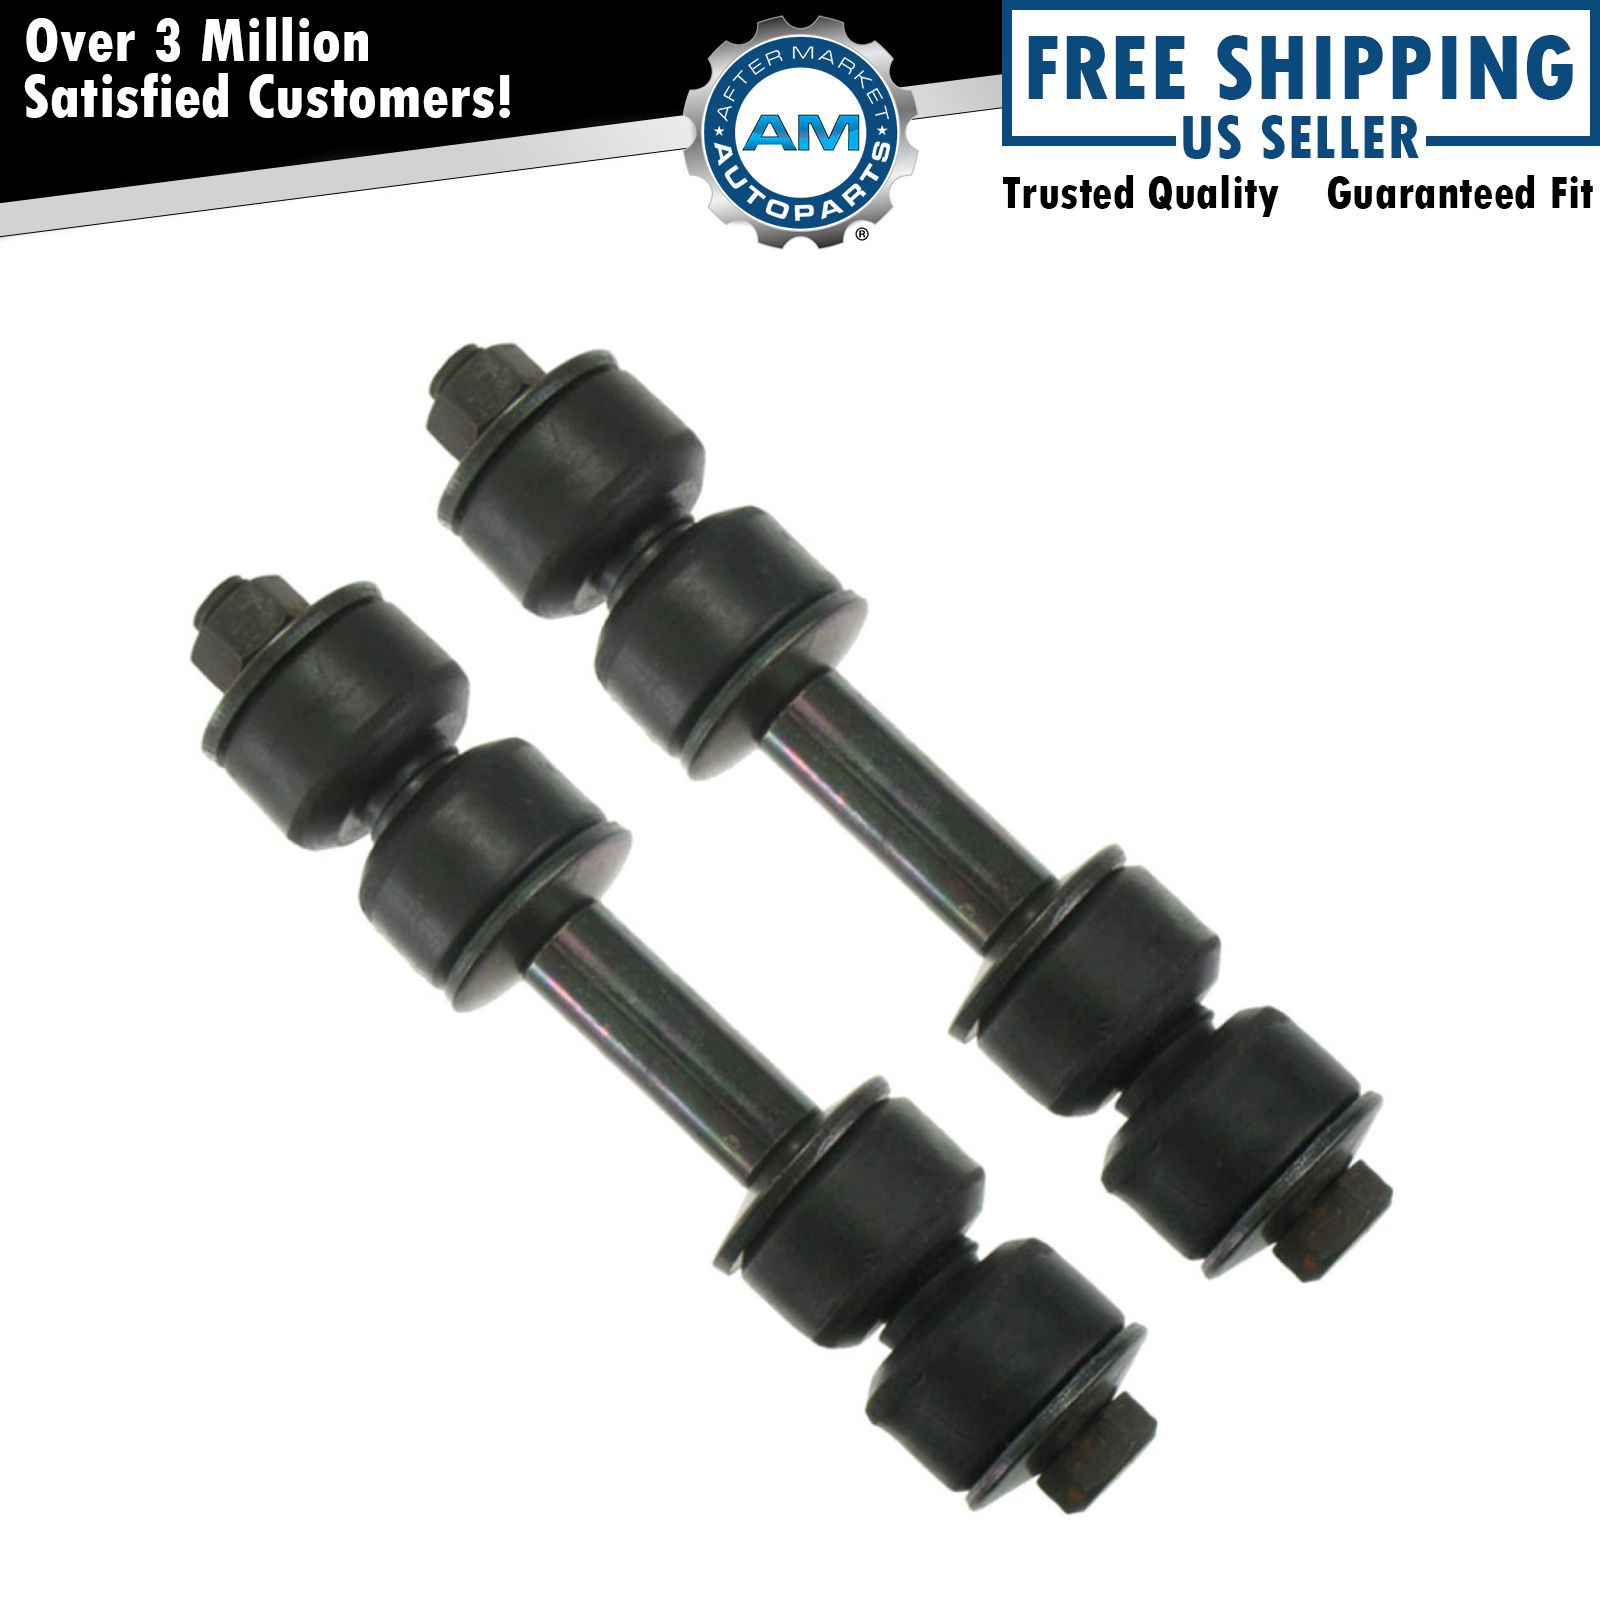 Front Sway Bar Link Kit Pair Set of 2 for Ford Cadillac Olds Chevy Dodge Buick